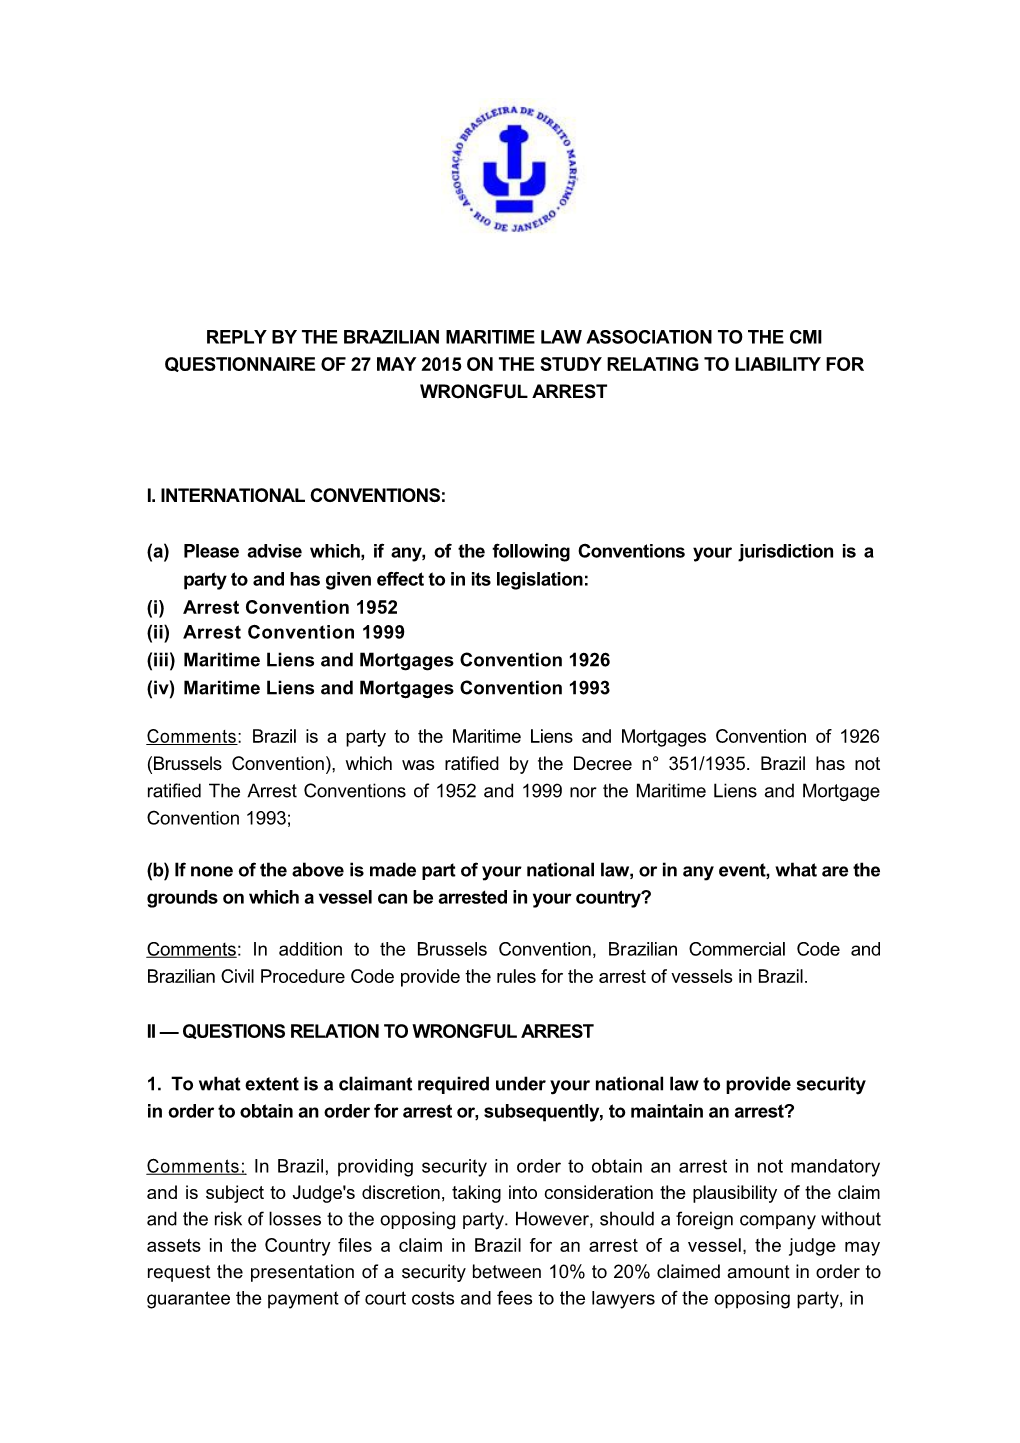 Reply by the Brazilian Maritime Law Association to the Cmi Questionnaire of 27 May 2015